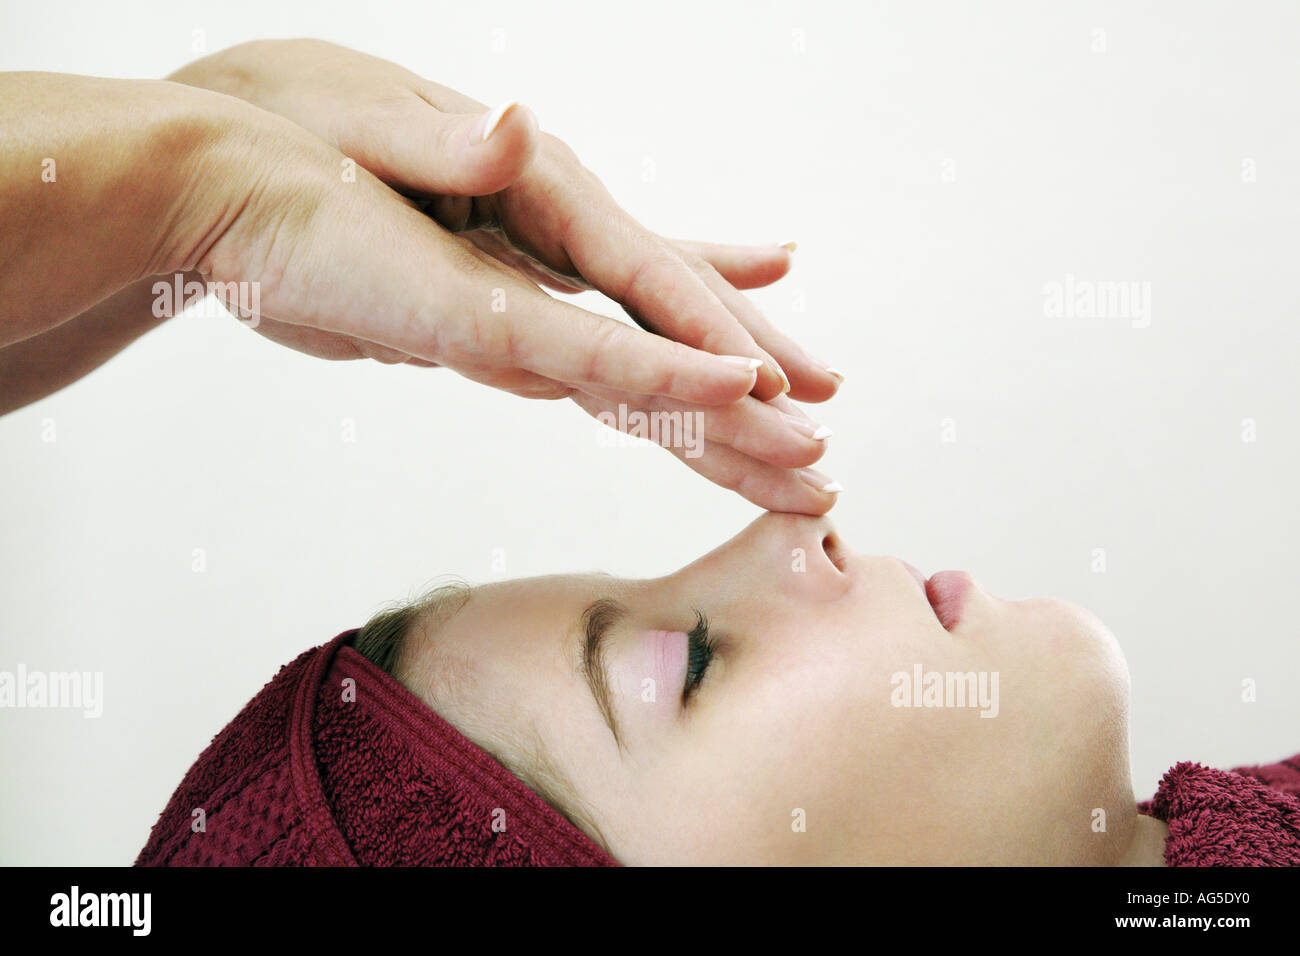 young woman getting a face massage Stock Photo